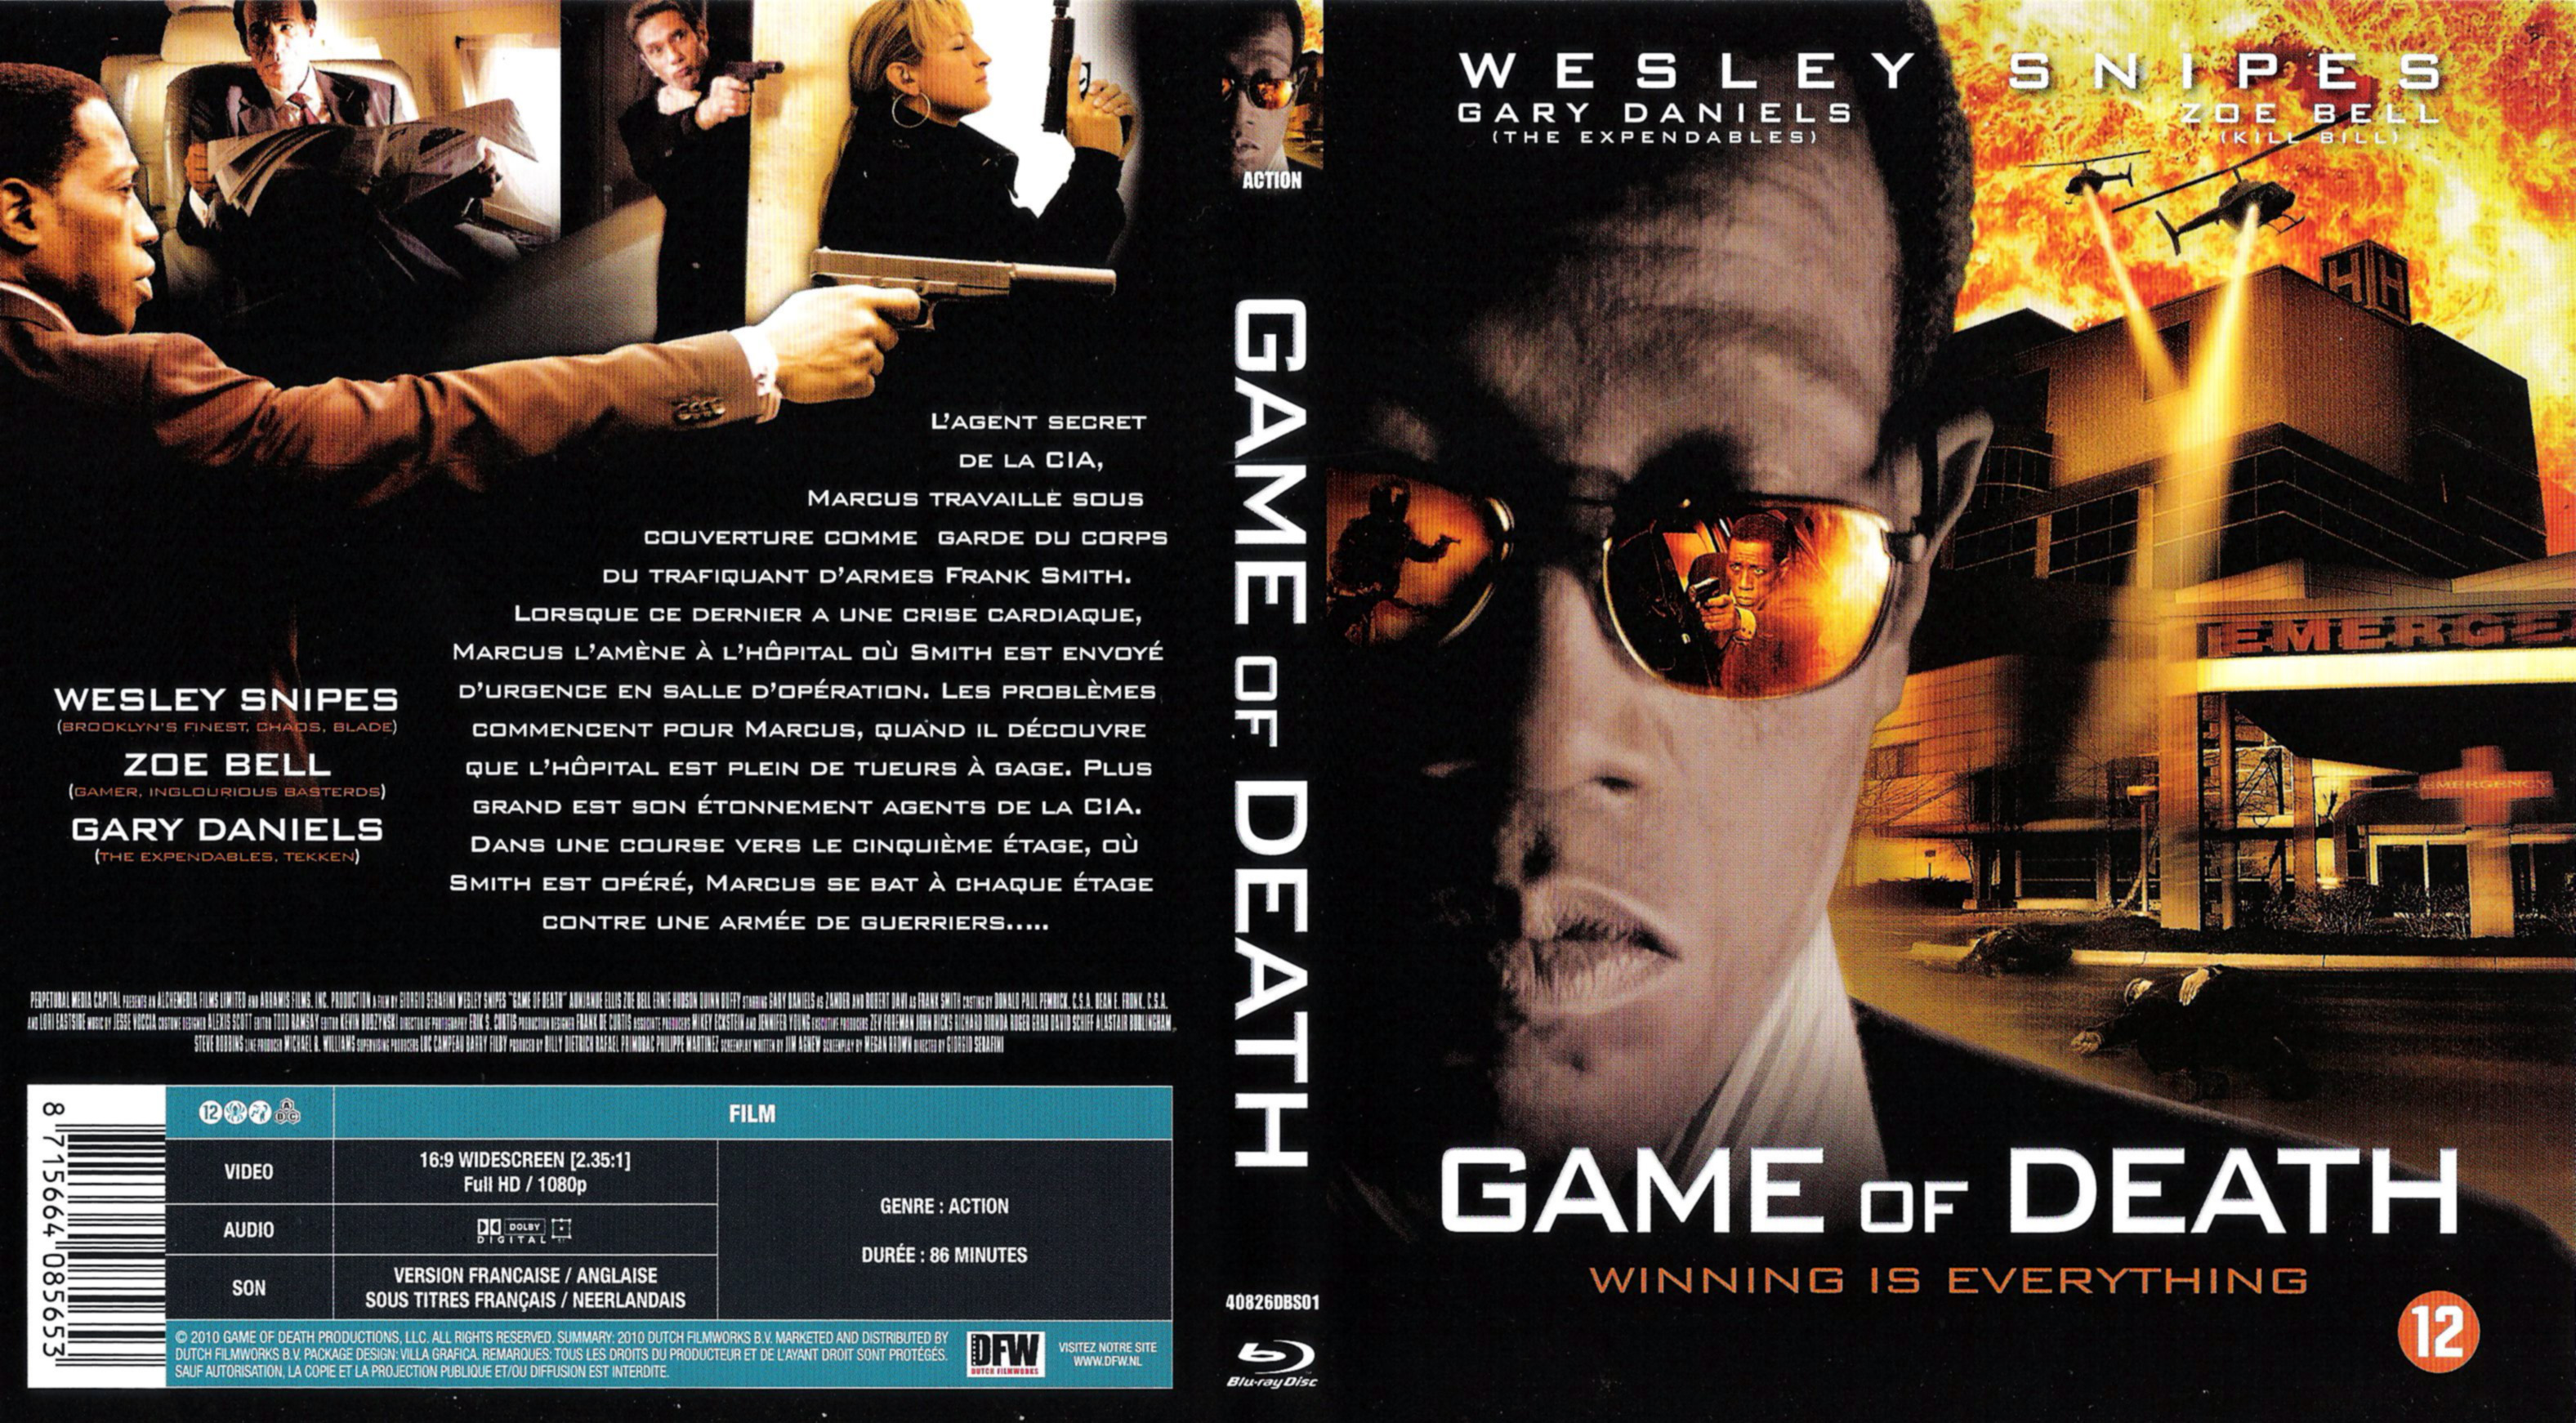 Jaquette DVD Game of death (BLU-RAY)